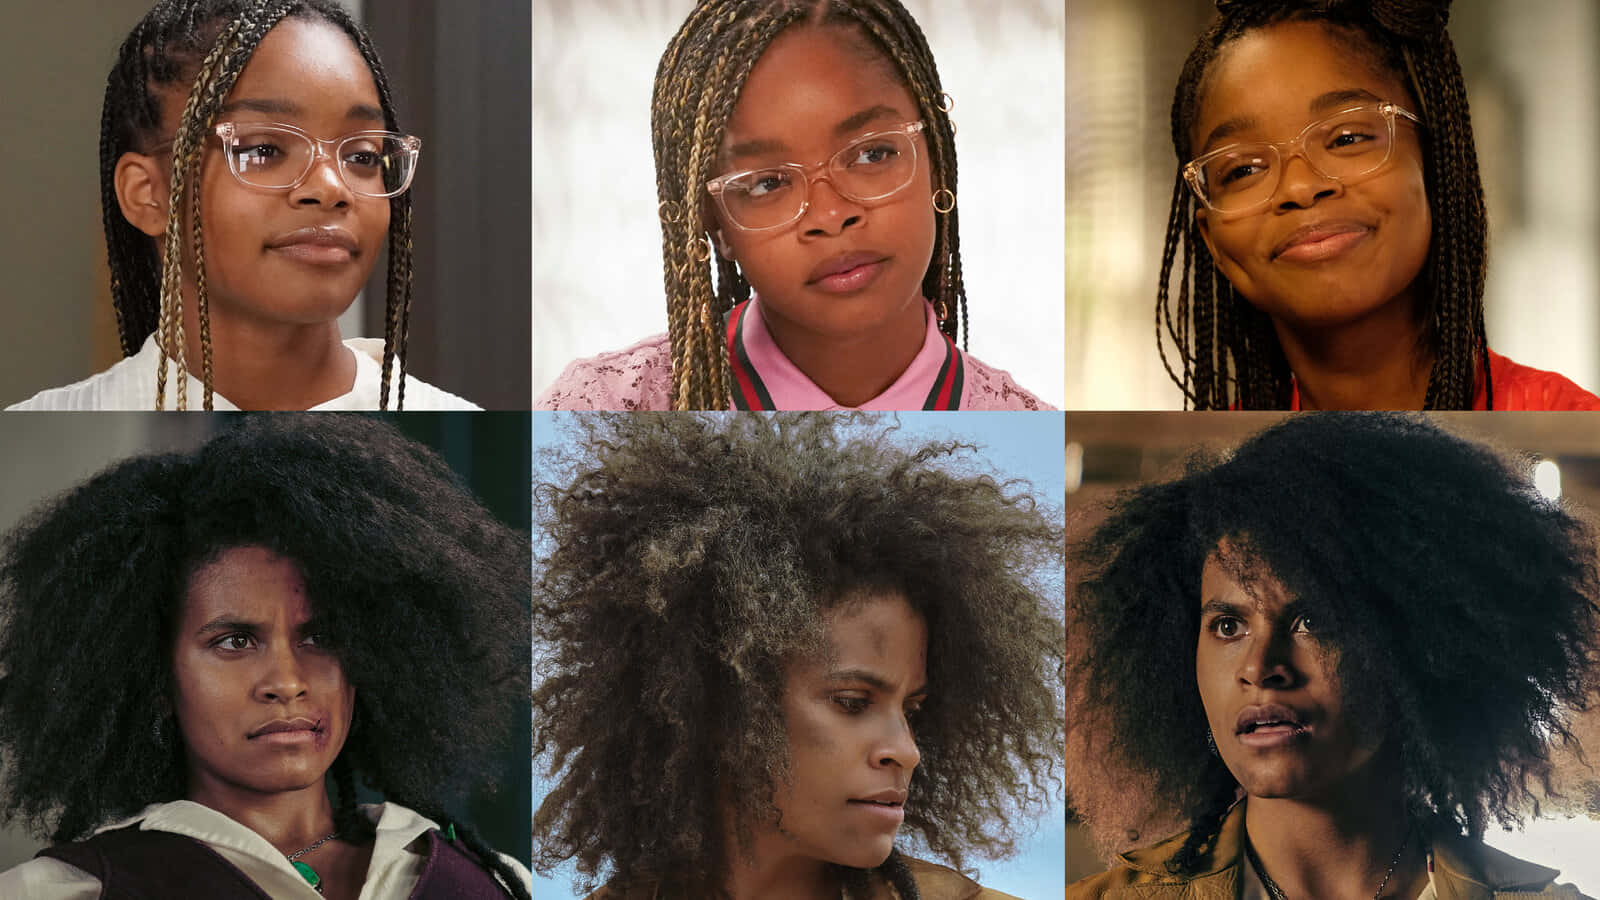 A Collage Of Different Black Women With Glasses